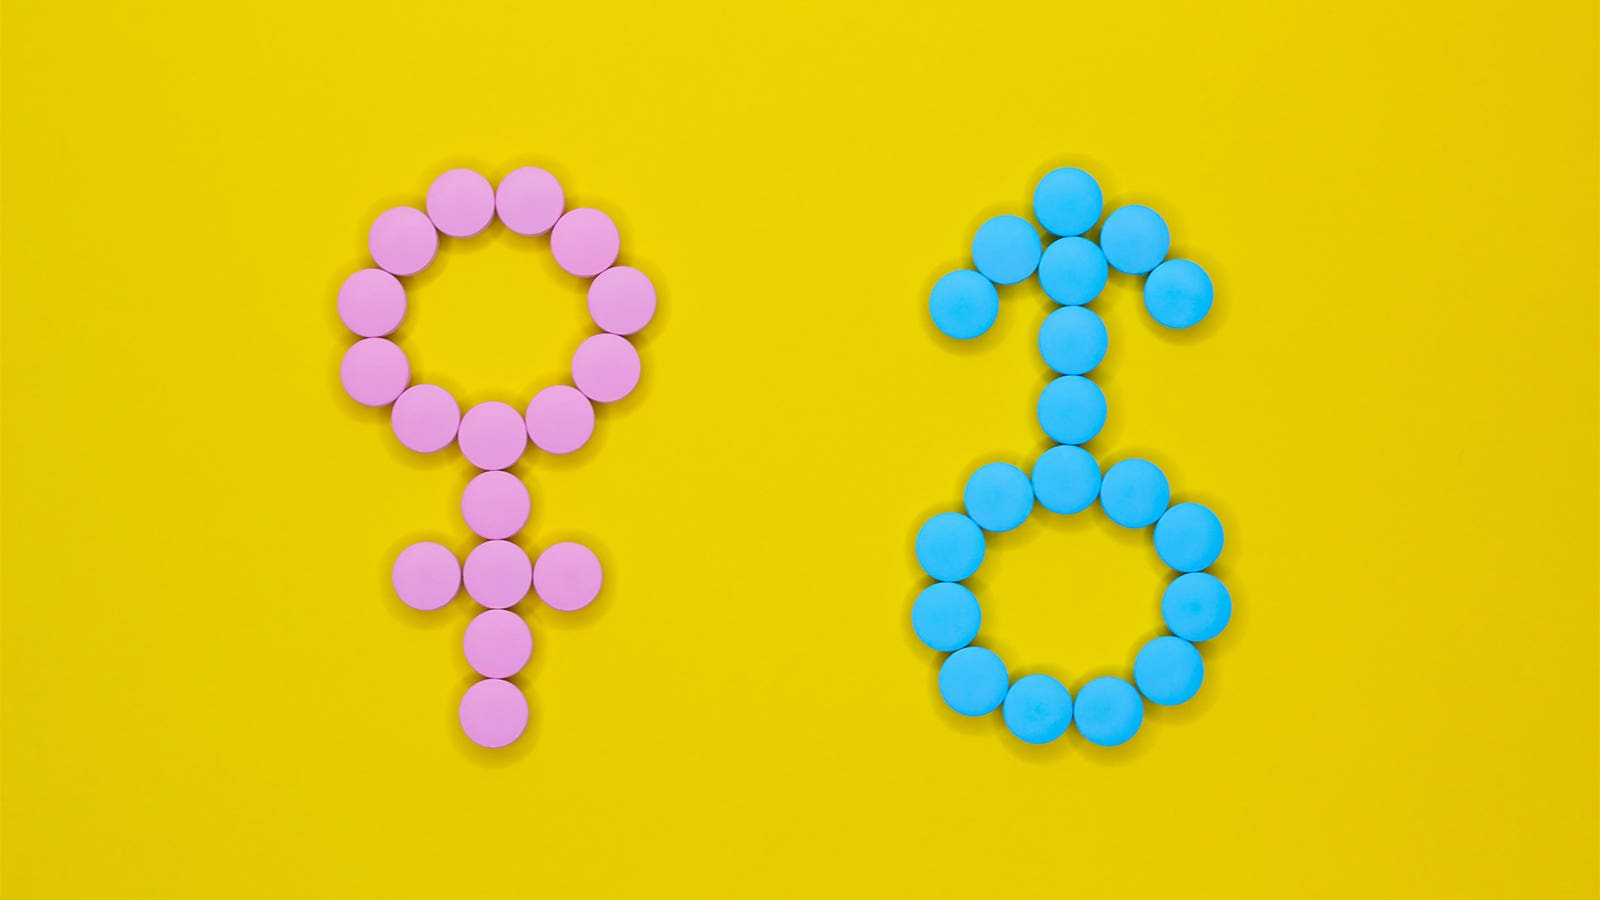 A photo of pink pills arranged to form the female symbol, and blue pills arranged to form the male symbol.